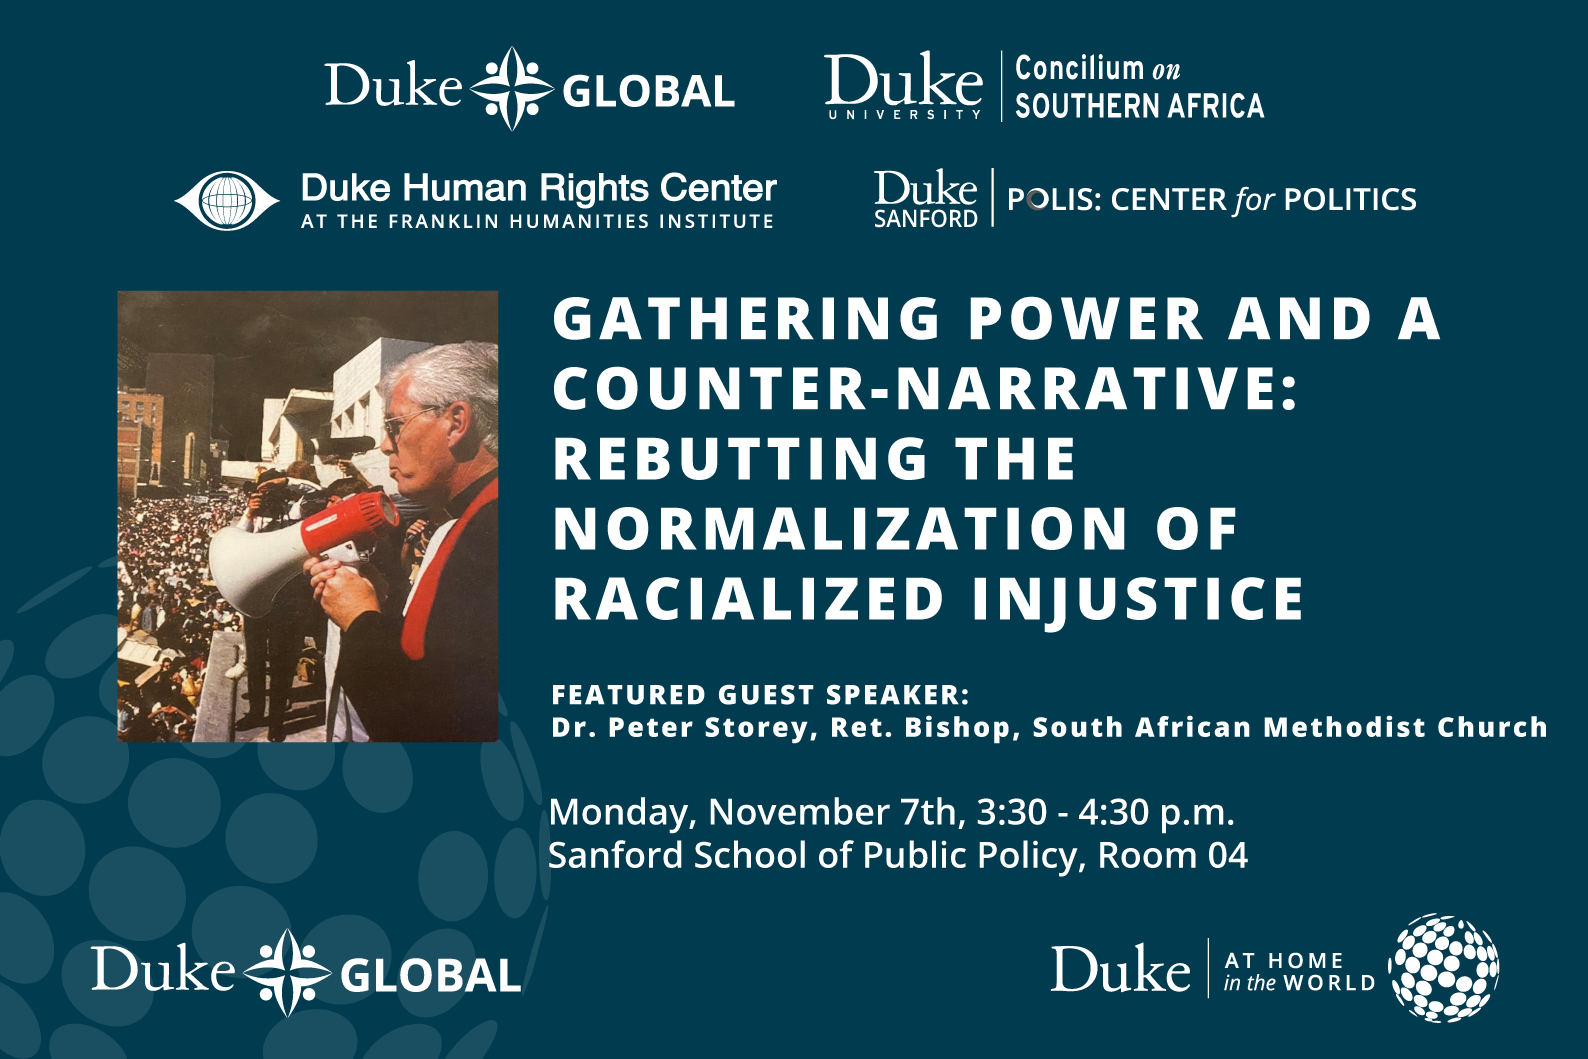 Gathering Power and a Counter-Narrative: Rebutting the Normalization of Racialized Injustice, Monday, November 7th, 3:30 - 4:30 p.m., Sanford School of Public Policy, Room 04